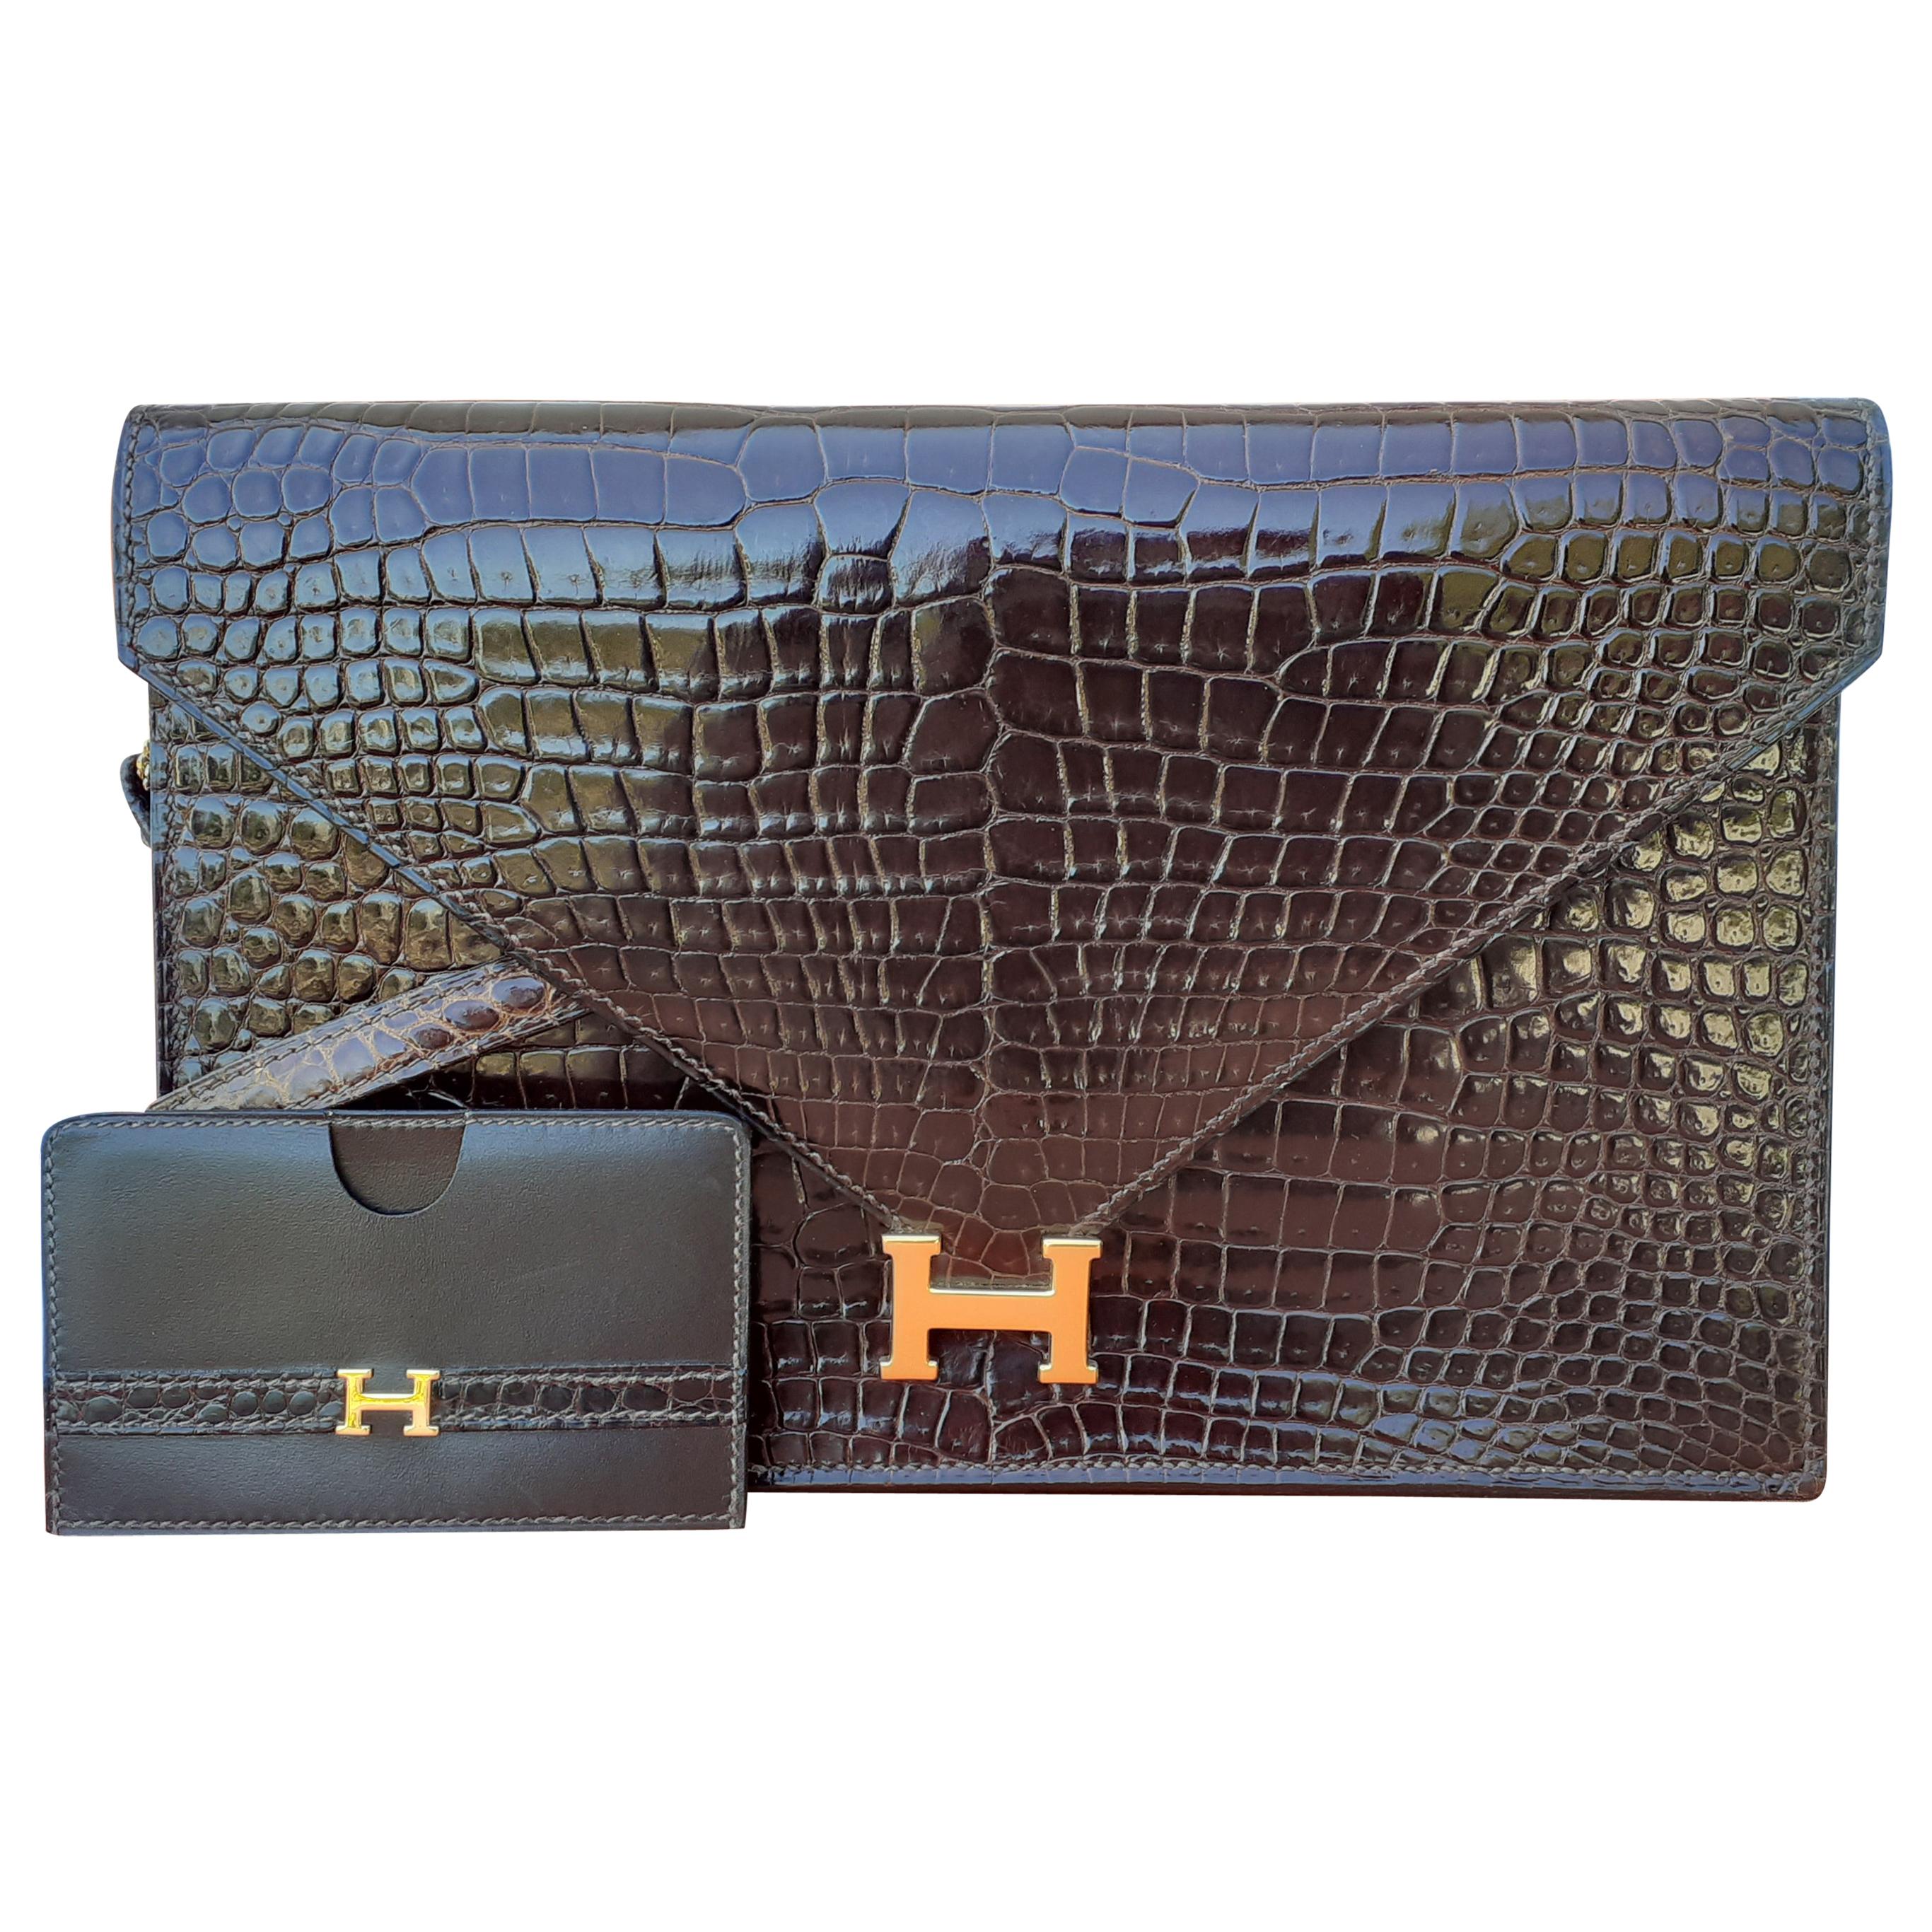 Exceptionnal Hermès Lydie Bag Clutch Brown Crocodile and Matching Card Holder